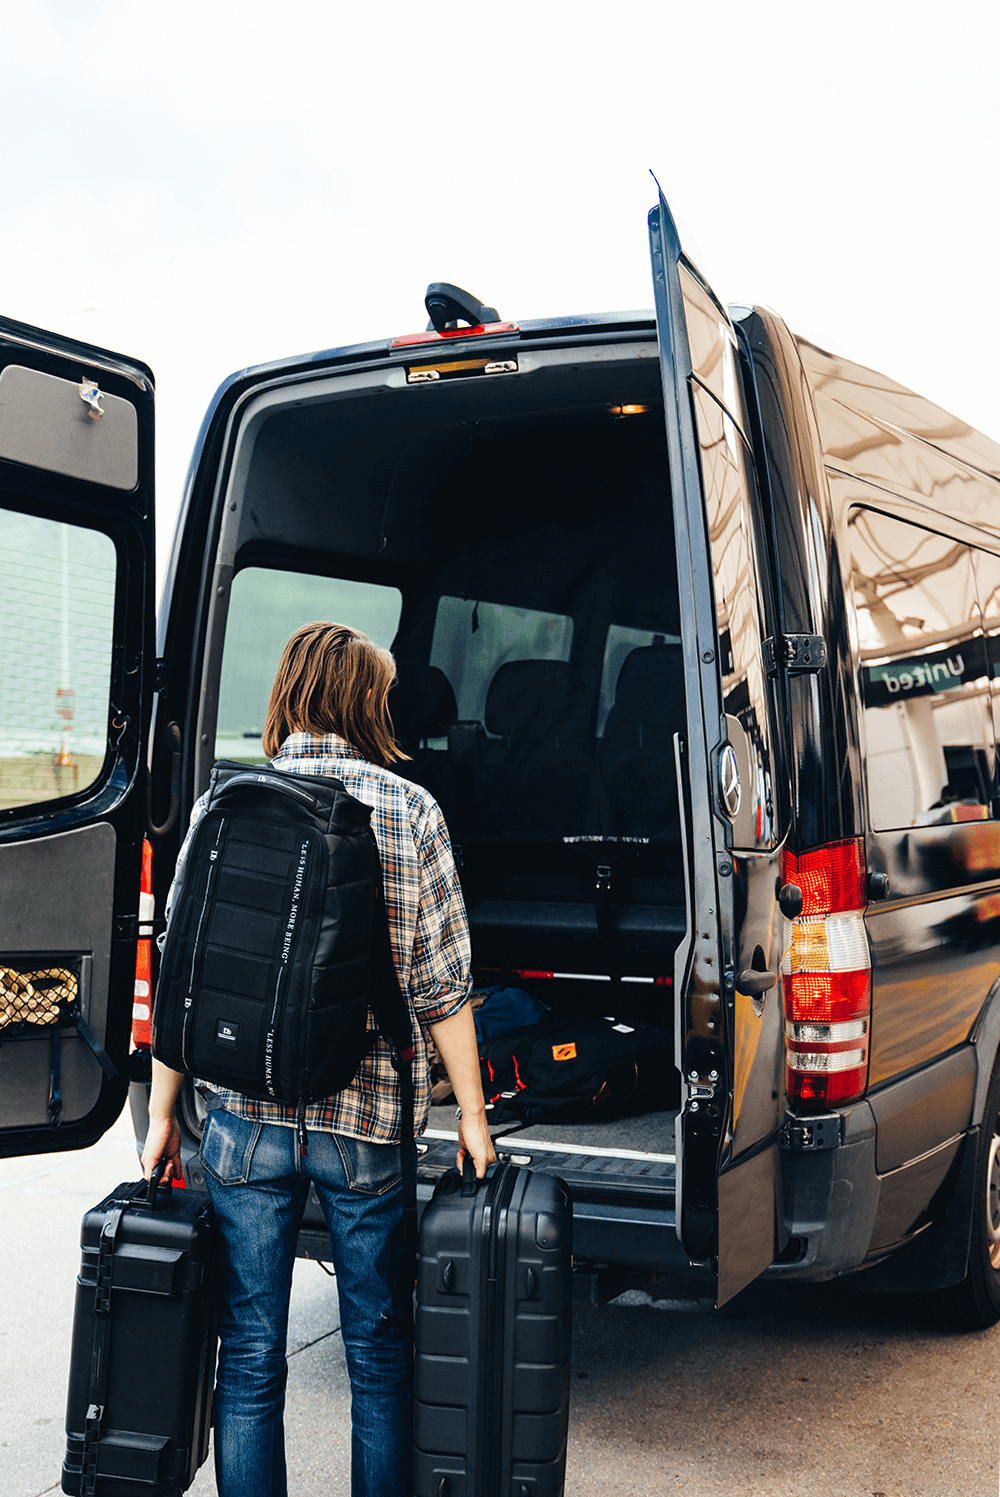 Passenger loading a sprinter van with luggage